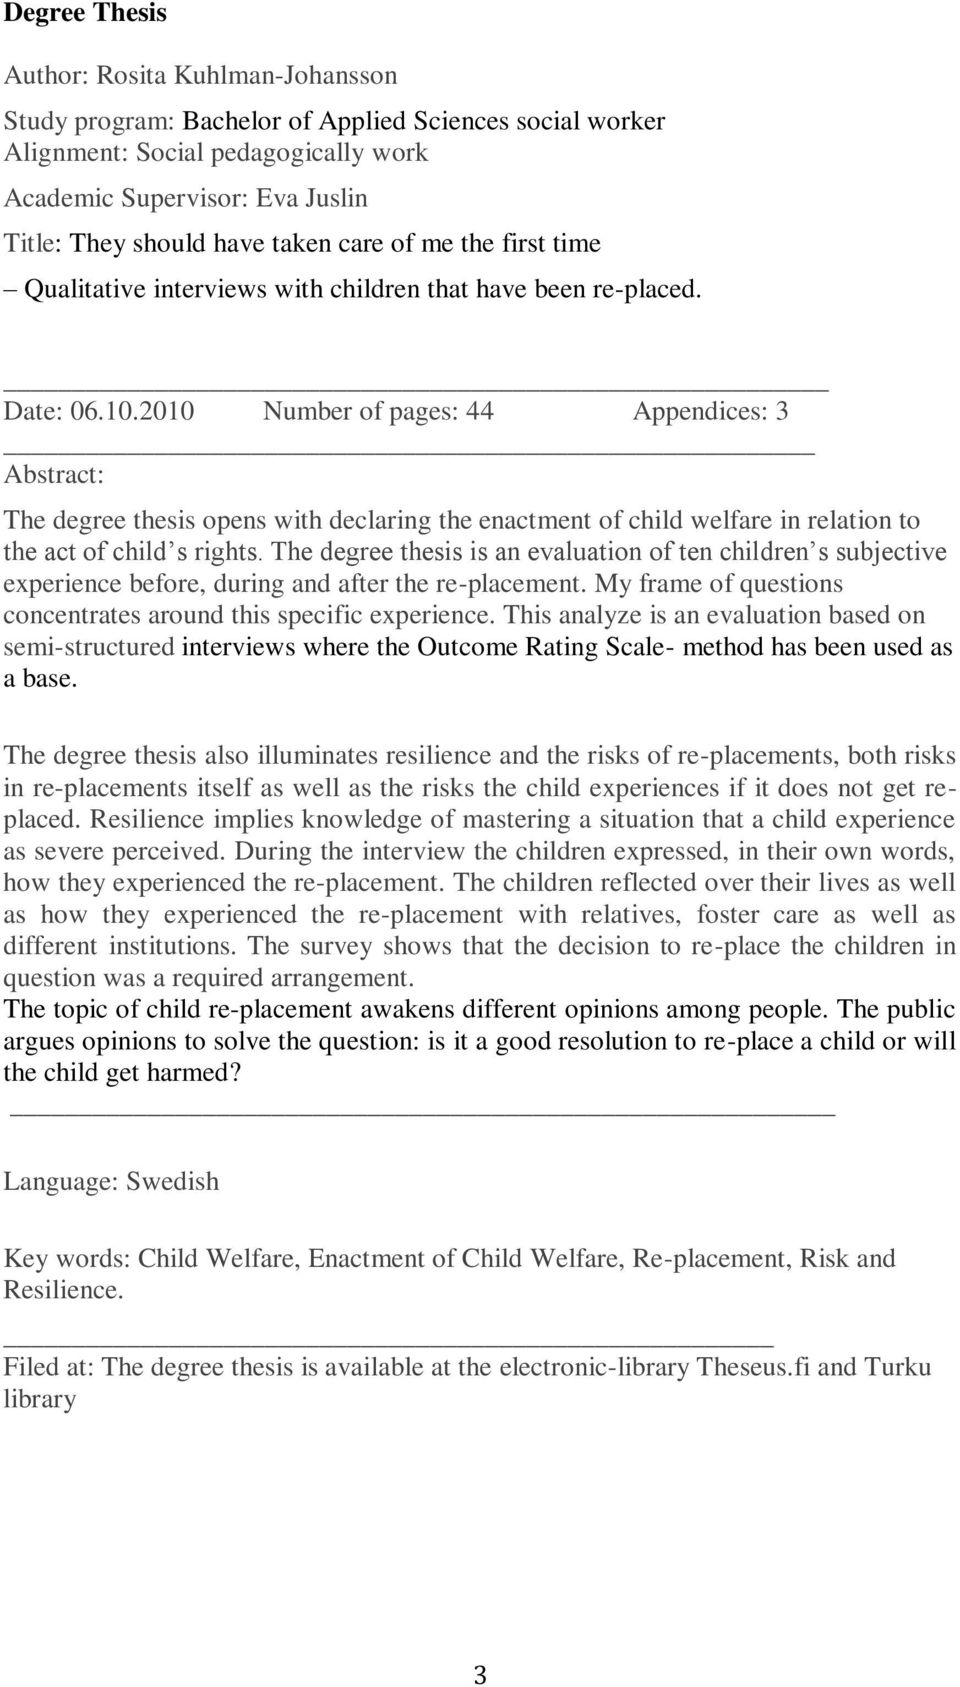 2010 Number of pages: 44 Appendices: 3 Abstract: The degree thesis opens with declaring the enactment of child welfare in relation to the act of child s rights.